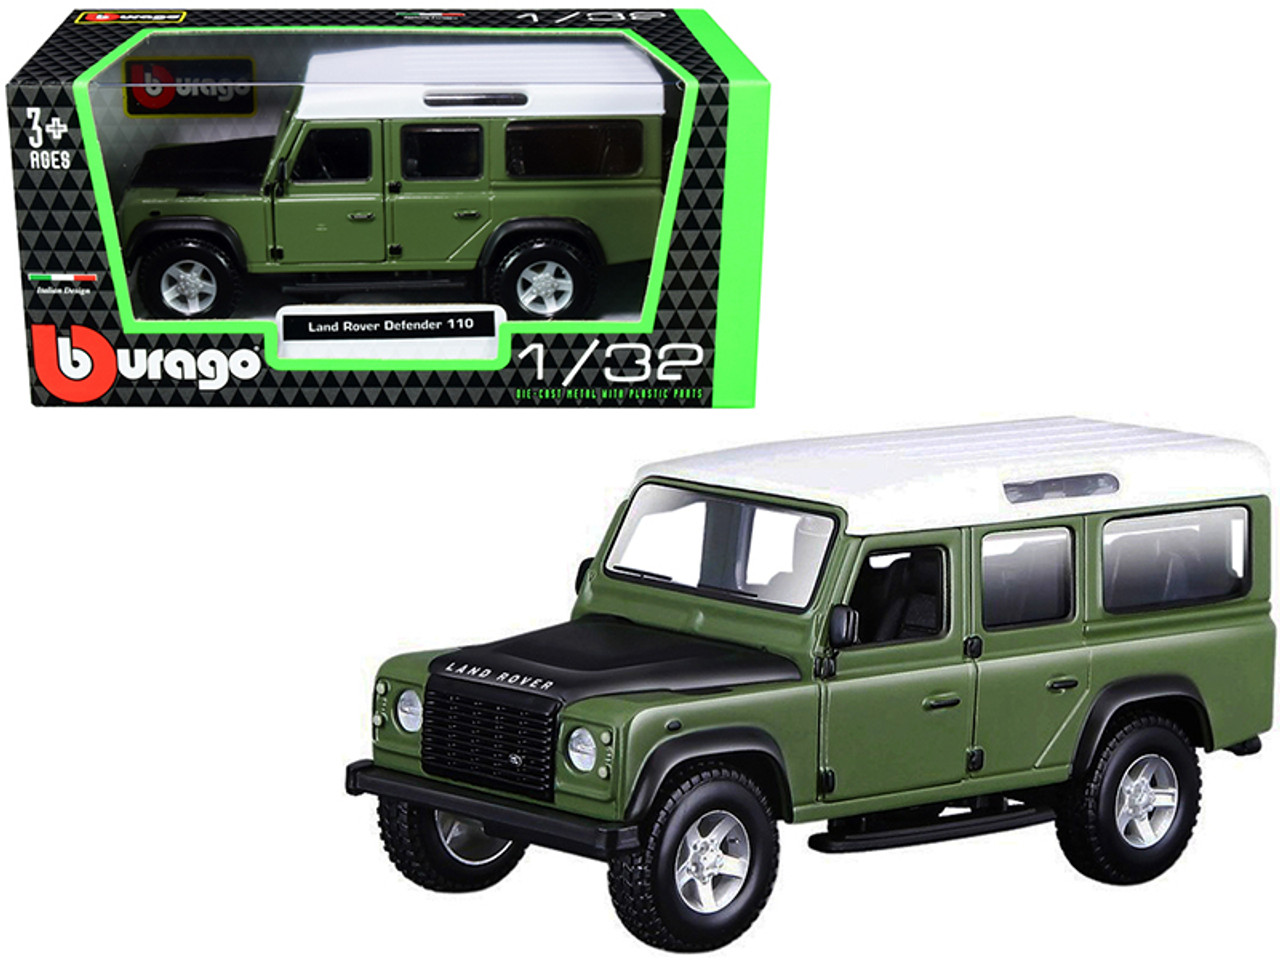 Land Rover Defender 110 Green with Black Hood and White Top 1/32 Diecast Model Car by Bburago